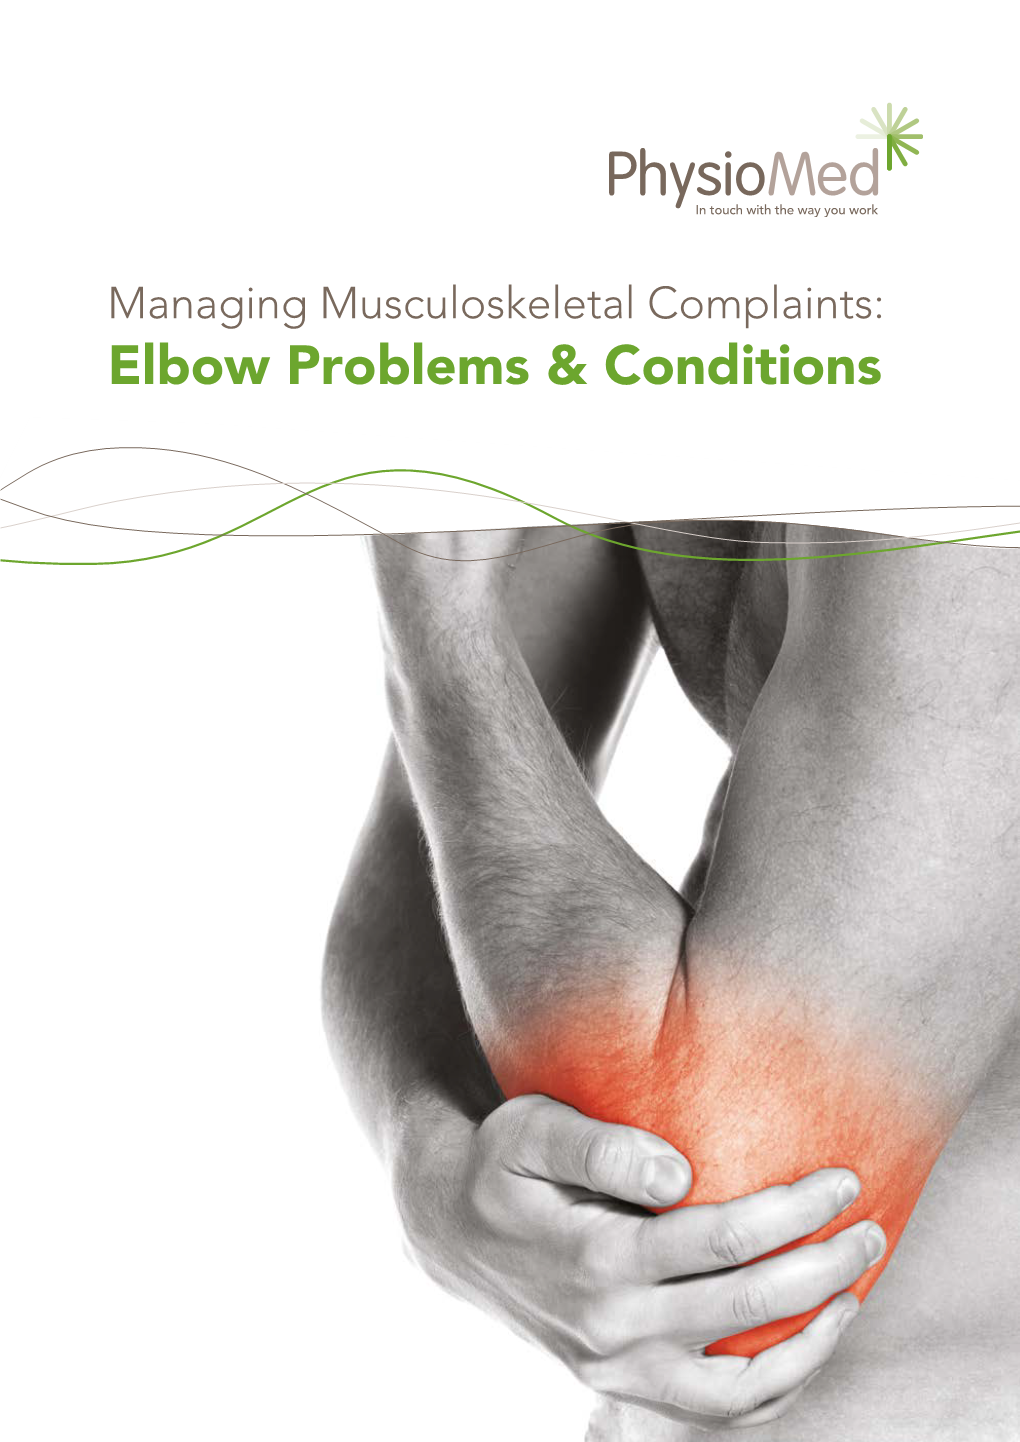 Elbow Problems & Conditions